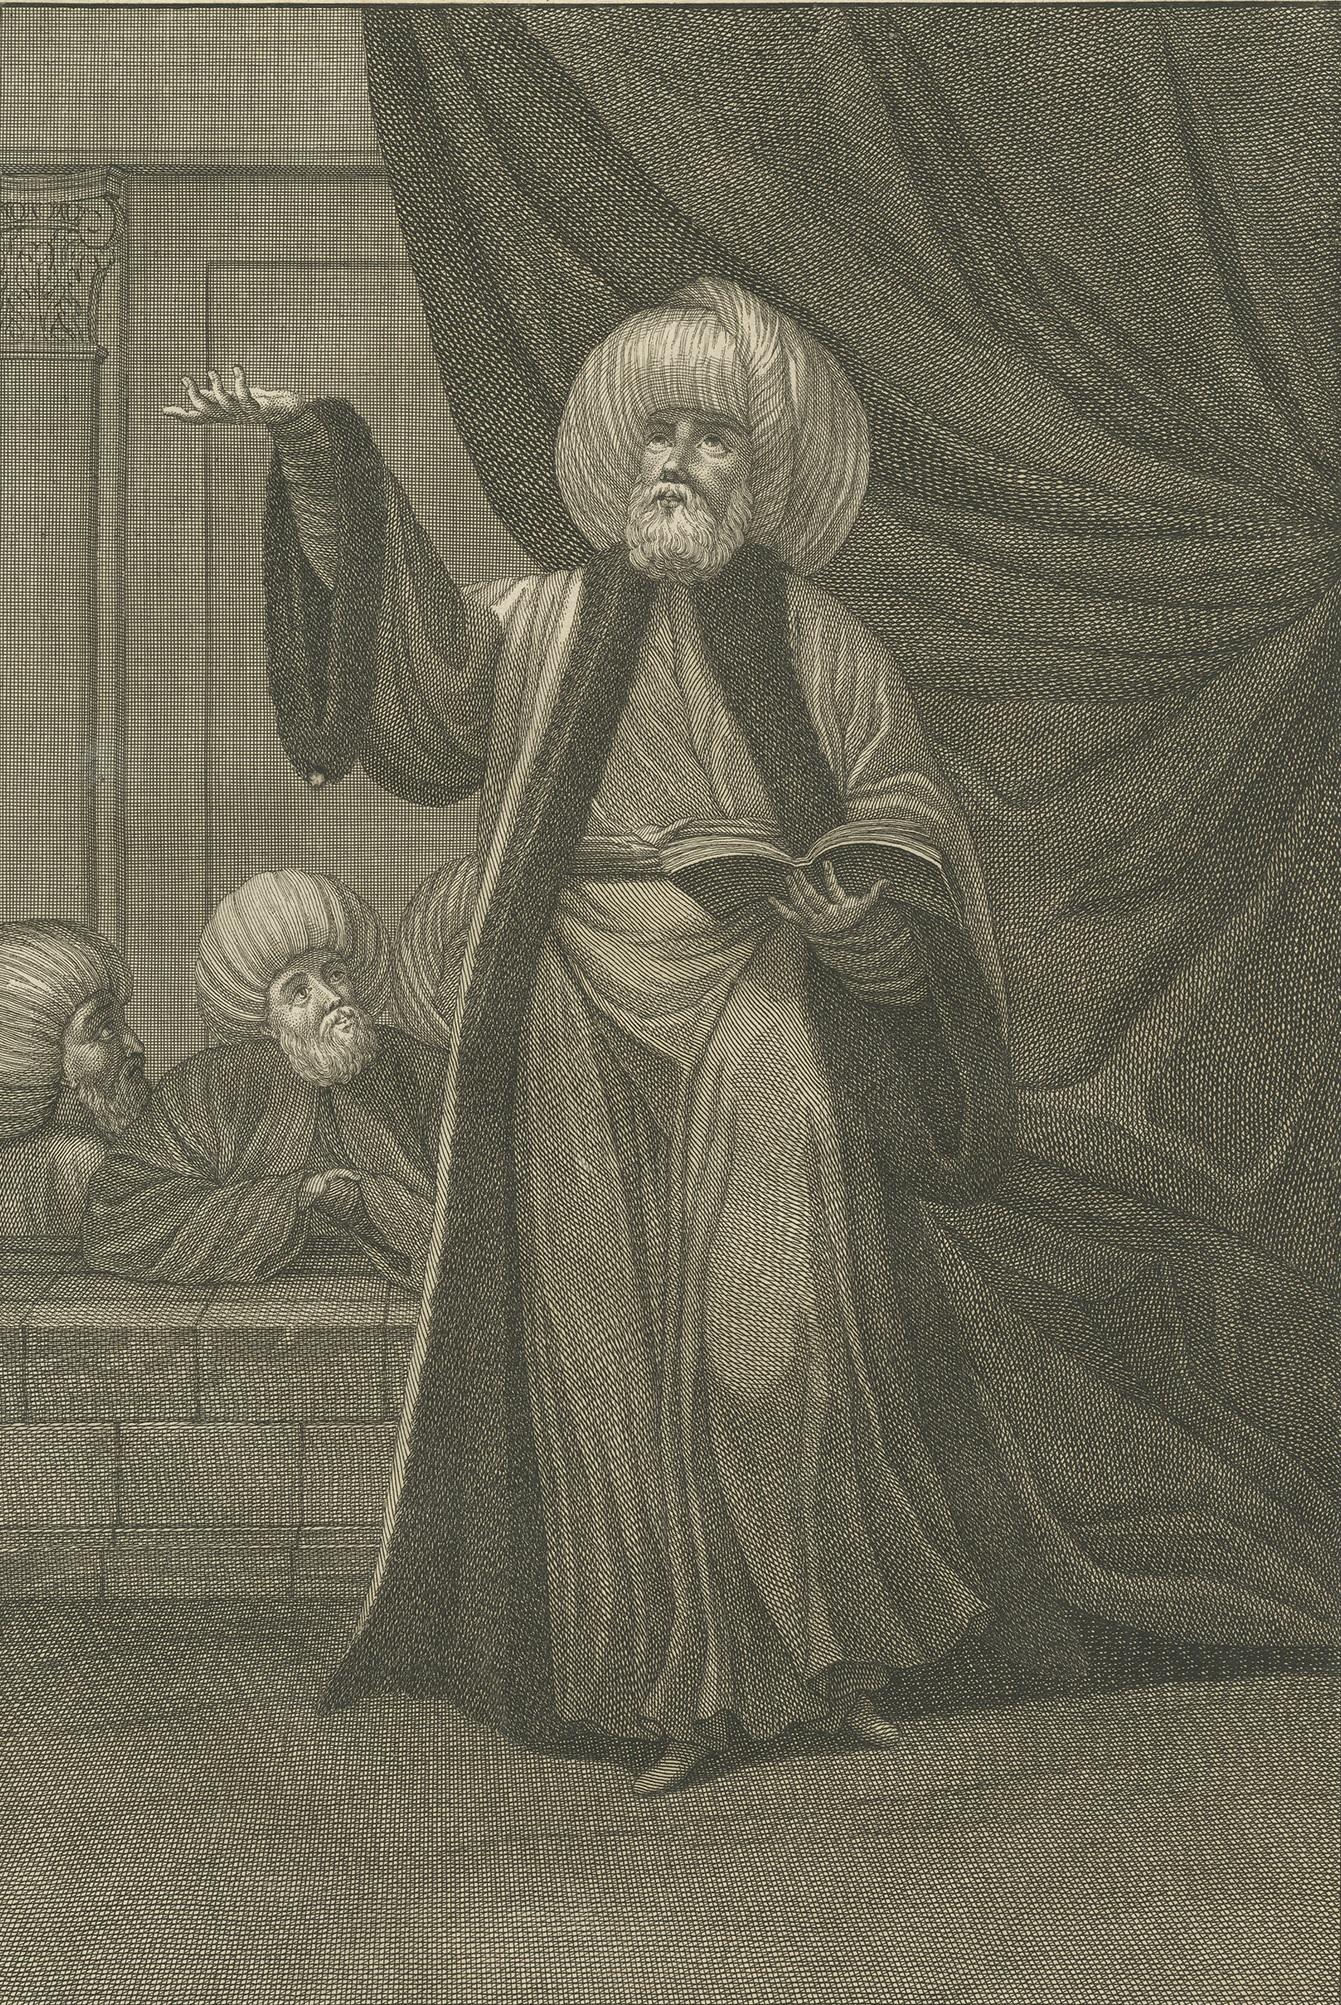 Antique portrait titled 'Le Moufti, ou Chef de la Loy'. Old print of the Mufti or Chief of the Law. A mufti is a Sunni Islamic scholar who is an interpreter or expounder of Islamic law (Sharia). This print originates from 'Ceremonies et costumes